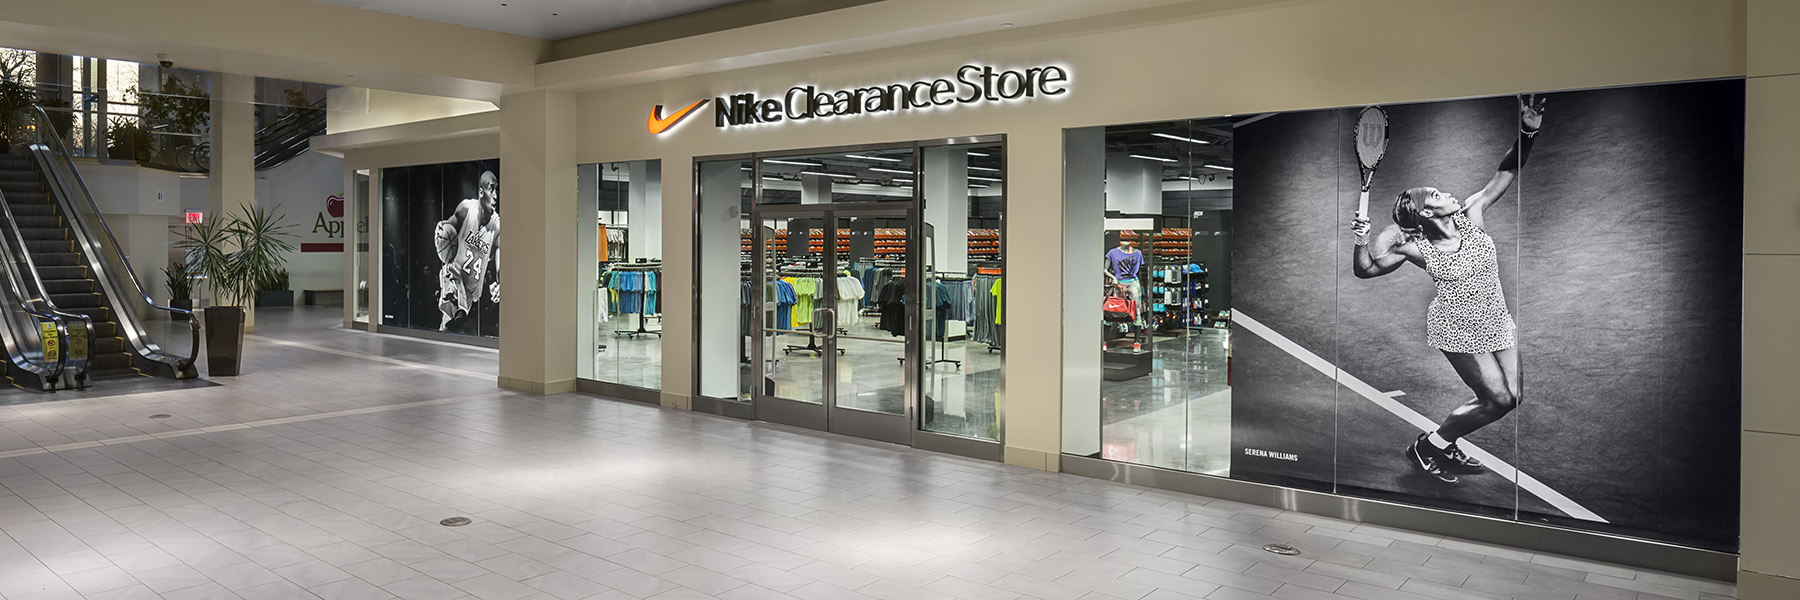 Nike Clearance Store - Flushing Queens, Flushing, NY Nike.com